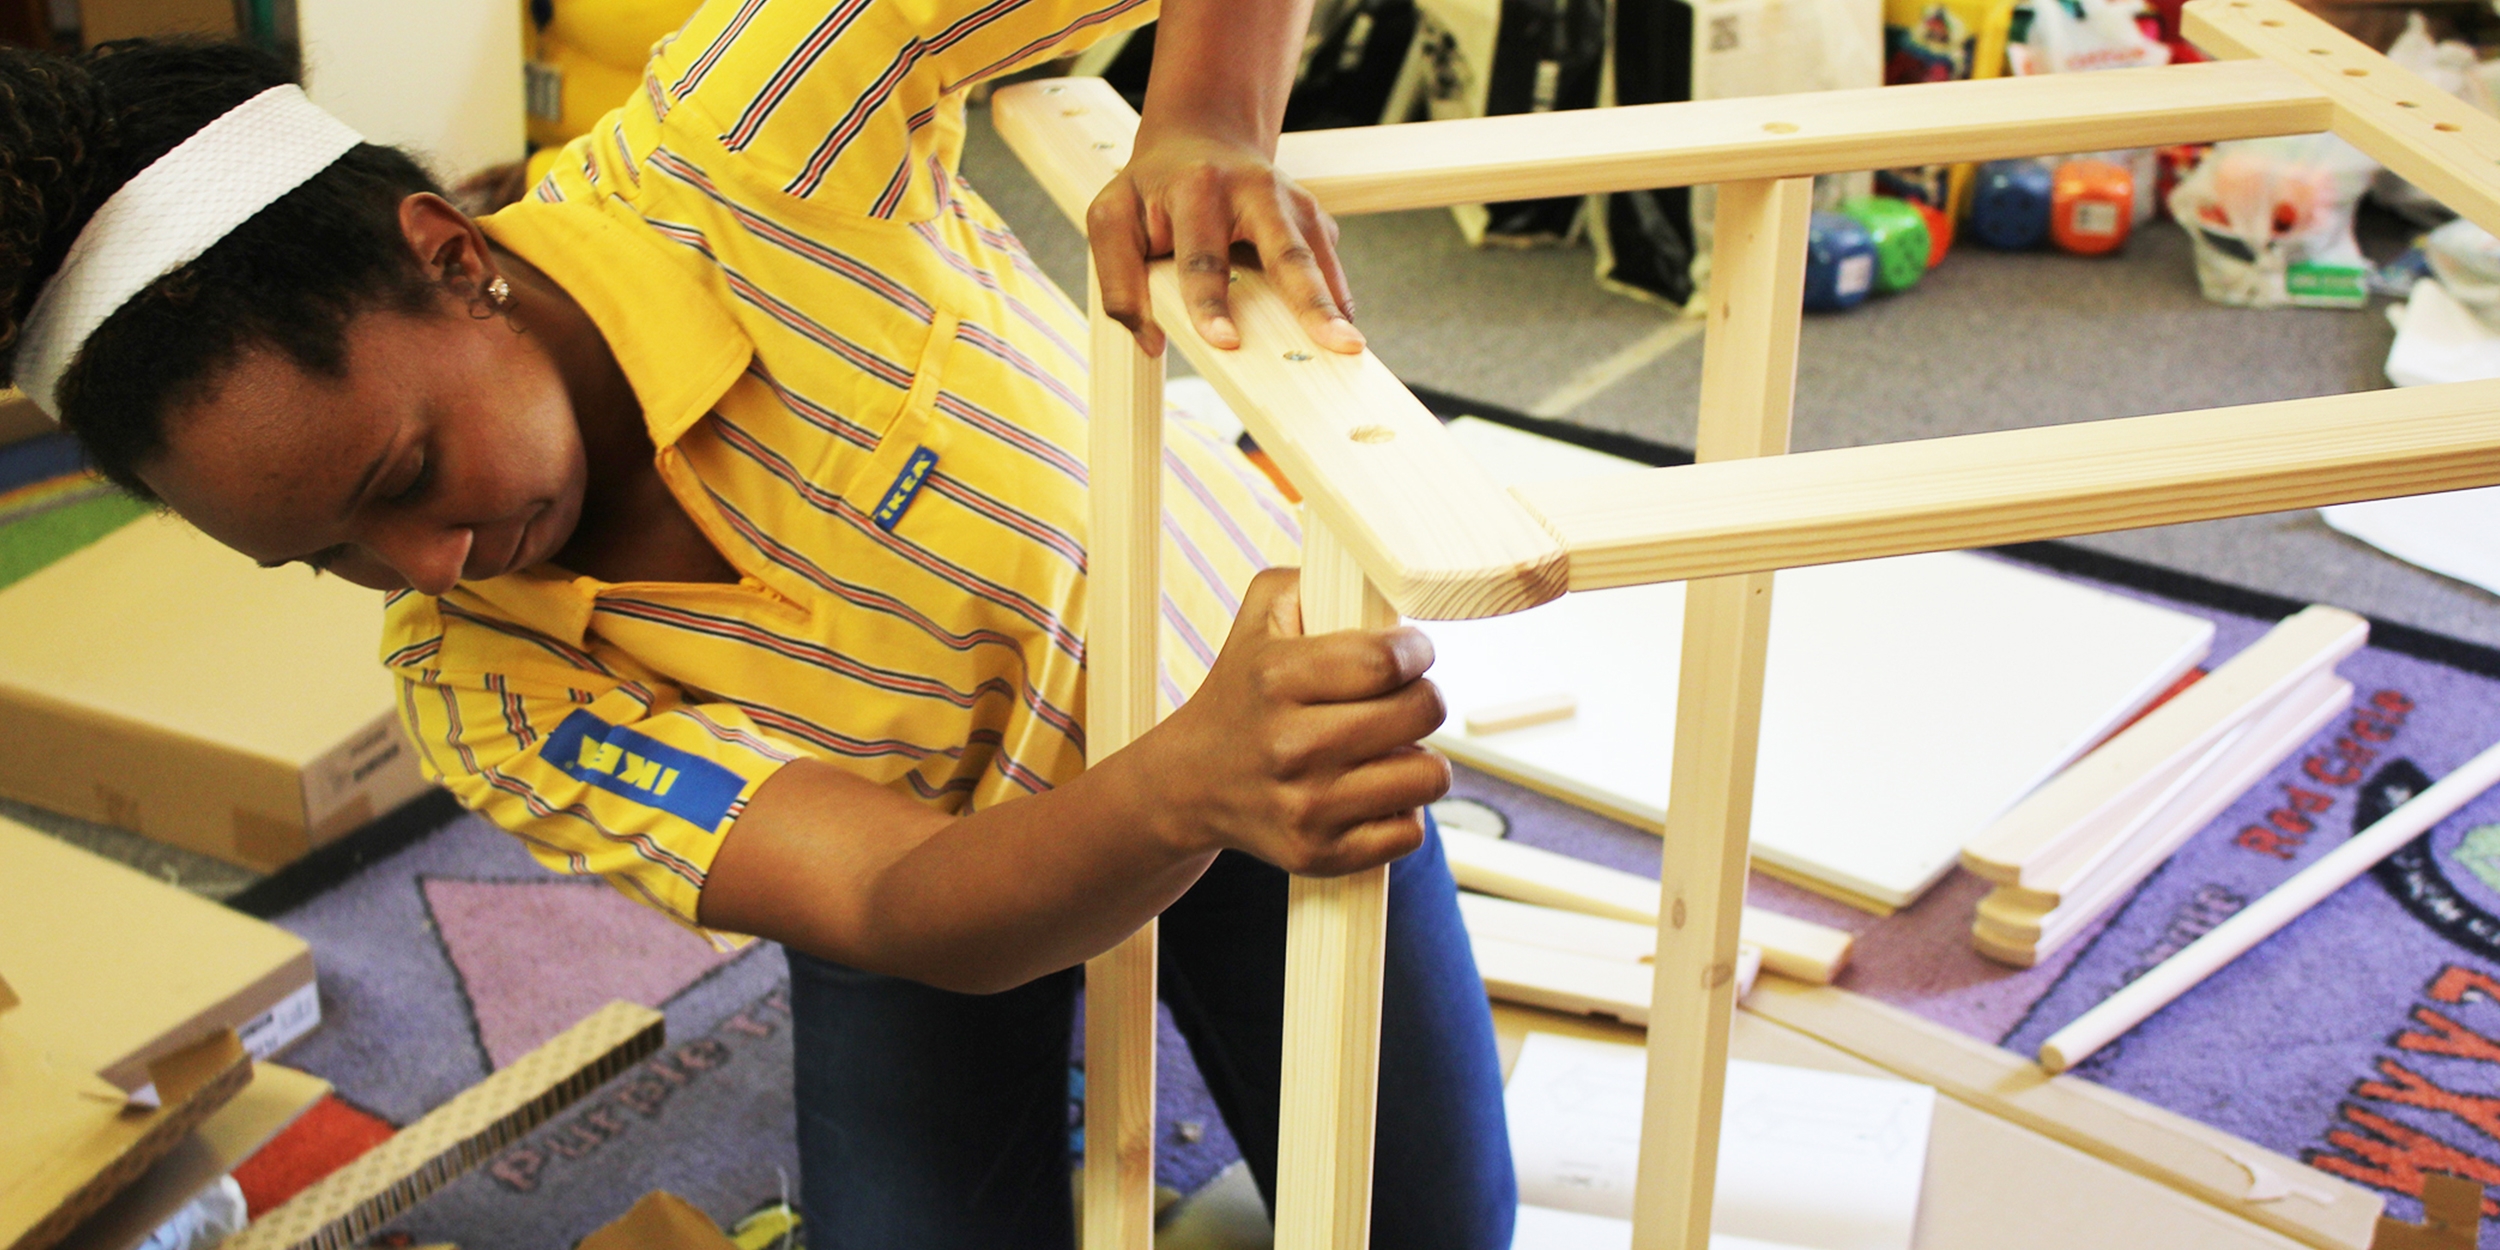 This photo was taken by Laura Gomez, Communications Manager, U.S. Programs, in April 2018. The pictured IKEA iWitness trip participant is assembling furniture as part of a childcare center renovation project. The center was damaged after Hurricane Harvey, and IKEA provided supplies and support to update one of their classrooms, to allow the center to build back to full capacity. Photo credit: Laura Gomez/Save the Children 2018.